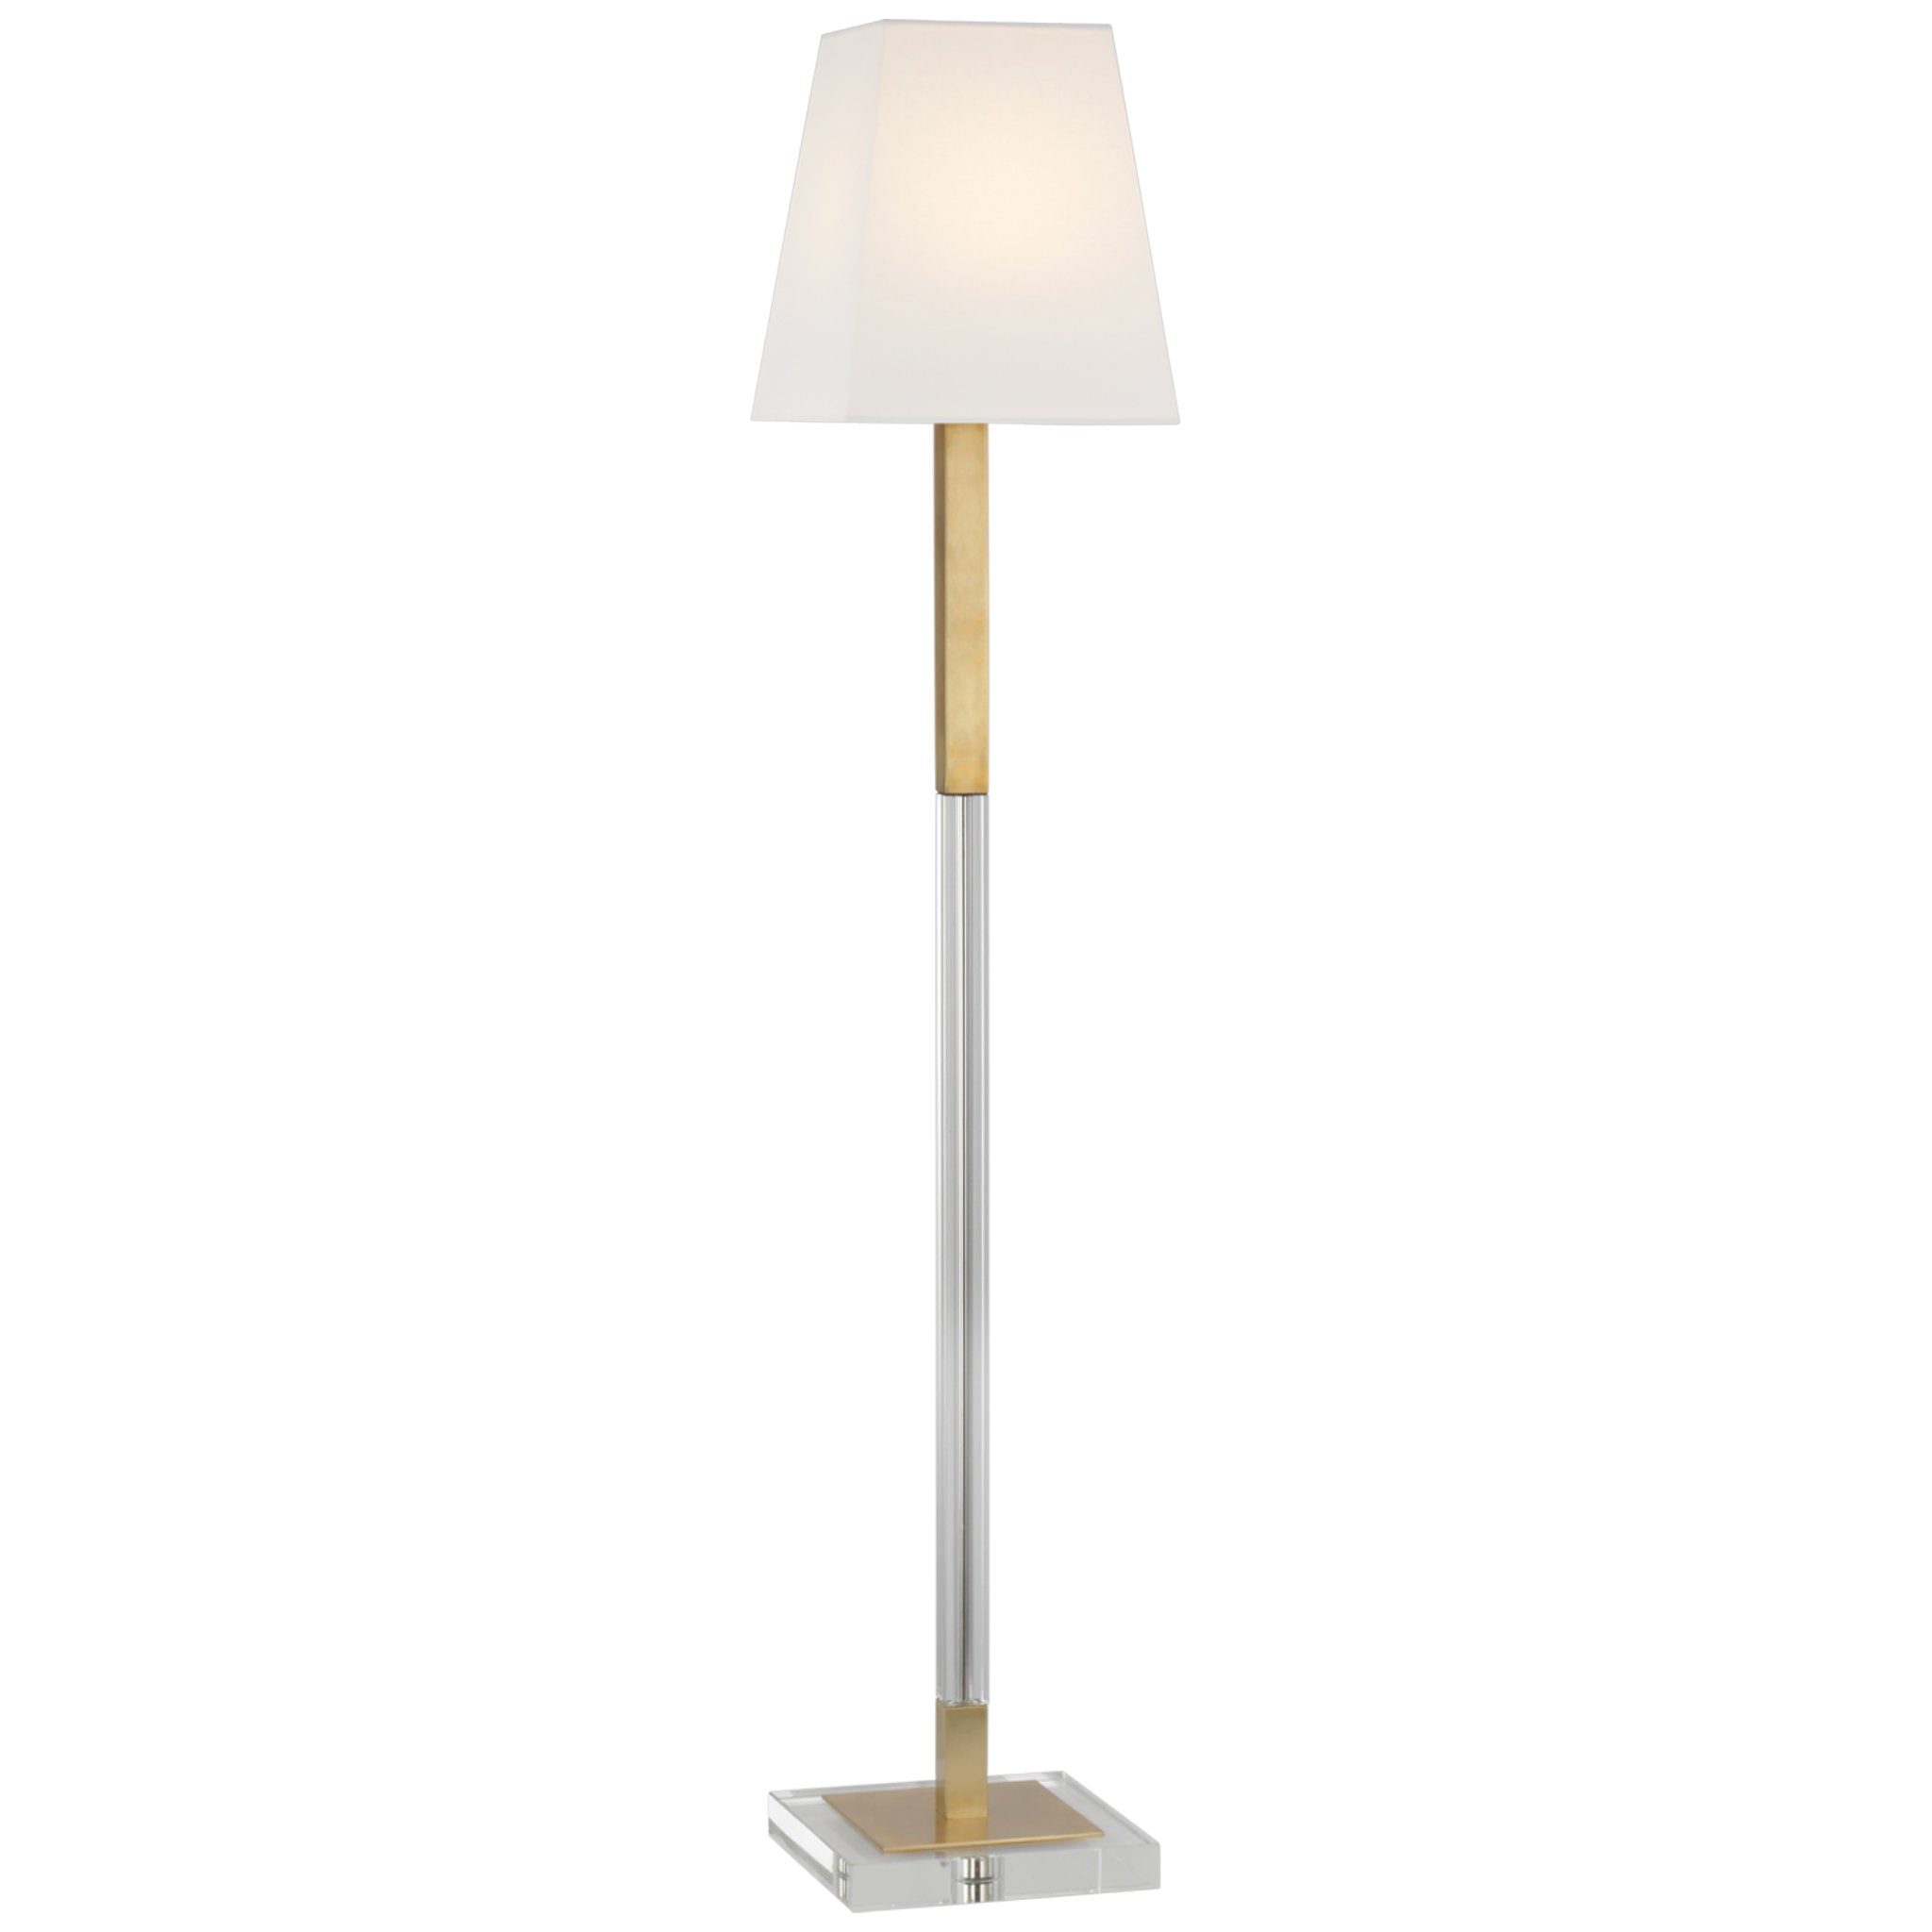 Chapman & Myers Reagan Medium Reading Floor Lamp in Antique-Burnished Brass and Crystal with Linen Shade